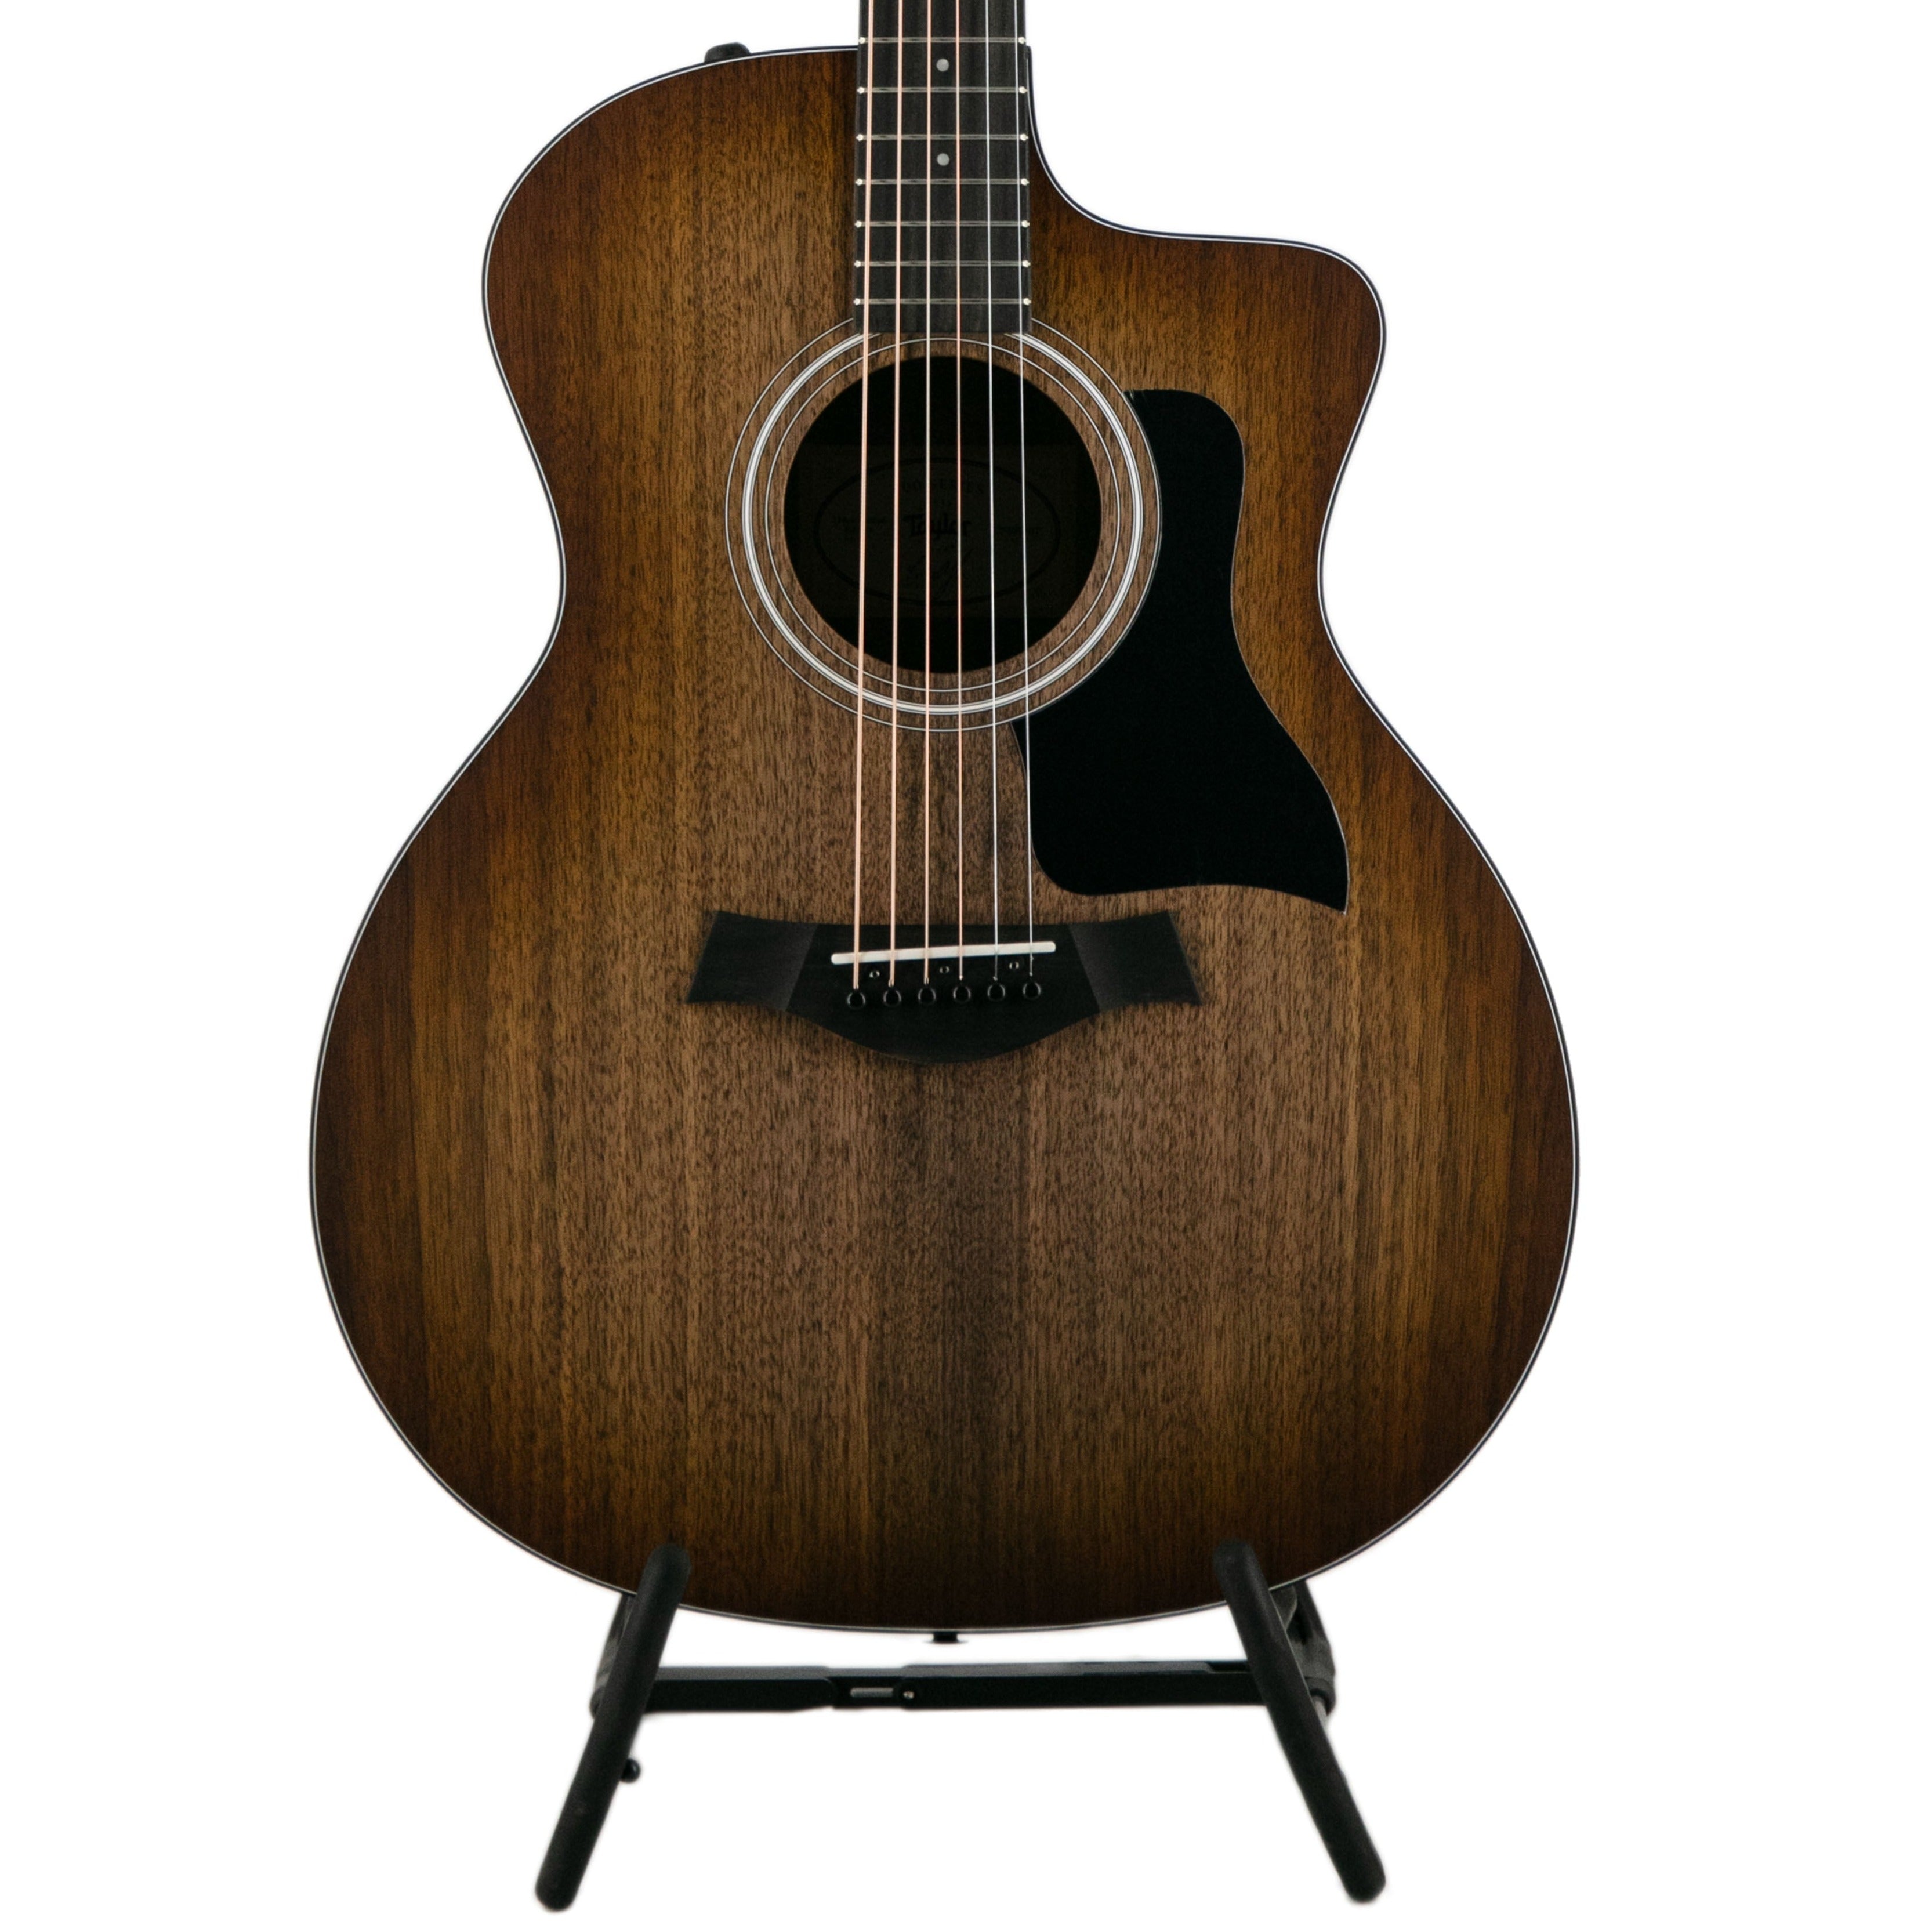 Taylor 124ce Special Edition Grand Auditorium Acoustic Guitar w/Bag, Shaded Edge Burst Top | Zoso Music Sdn Bhd